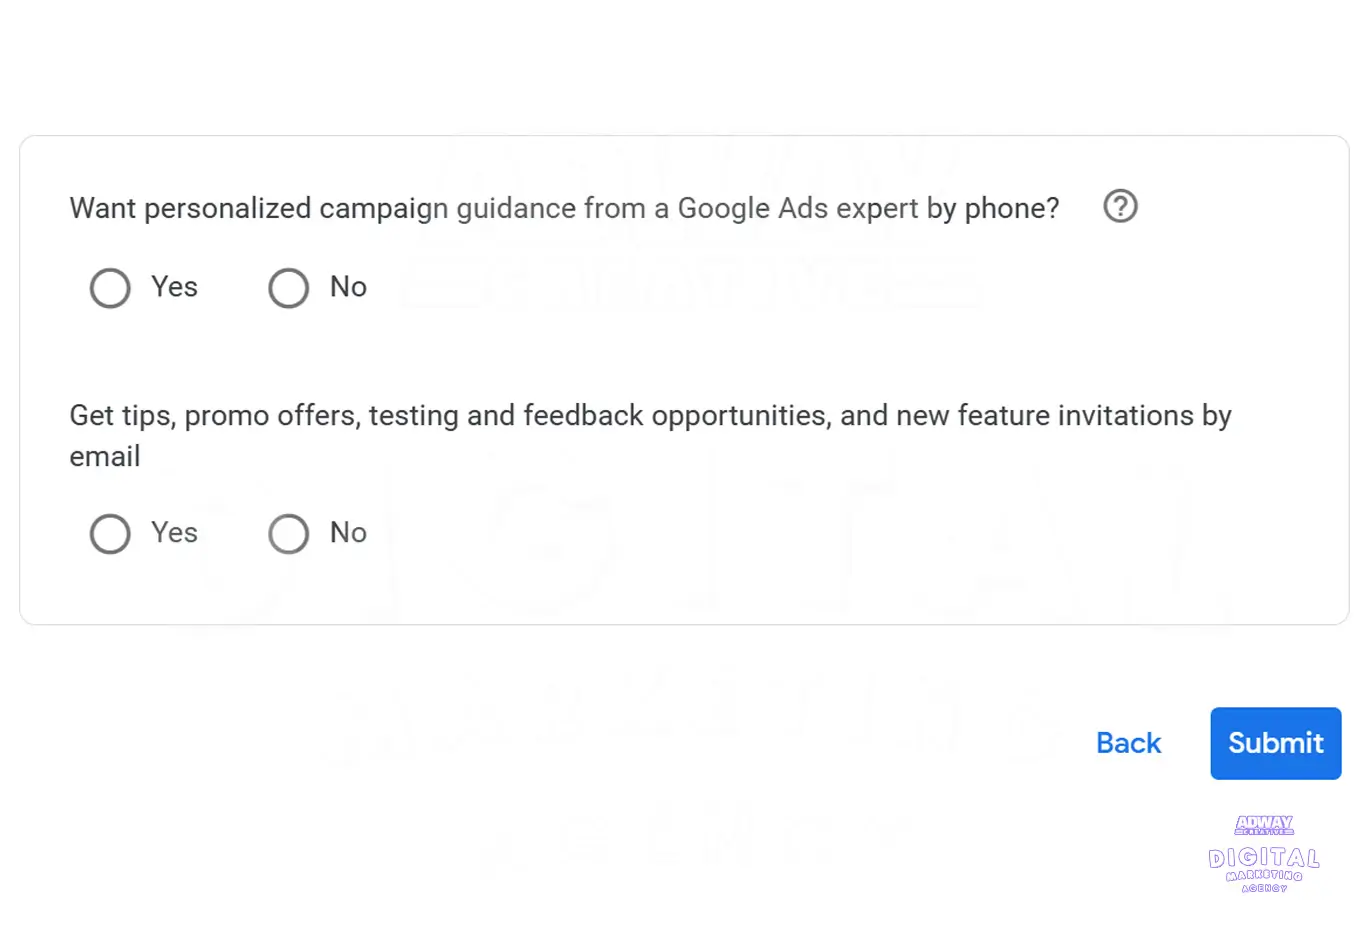 Decide if you want personalized guidance from a Google Ads expert or receive tips and offers via email.